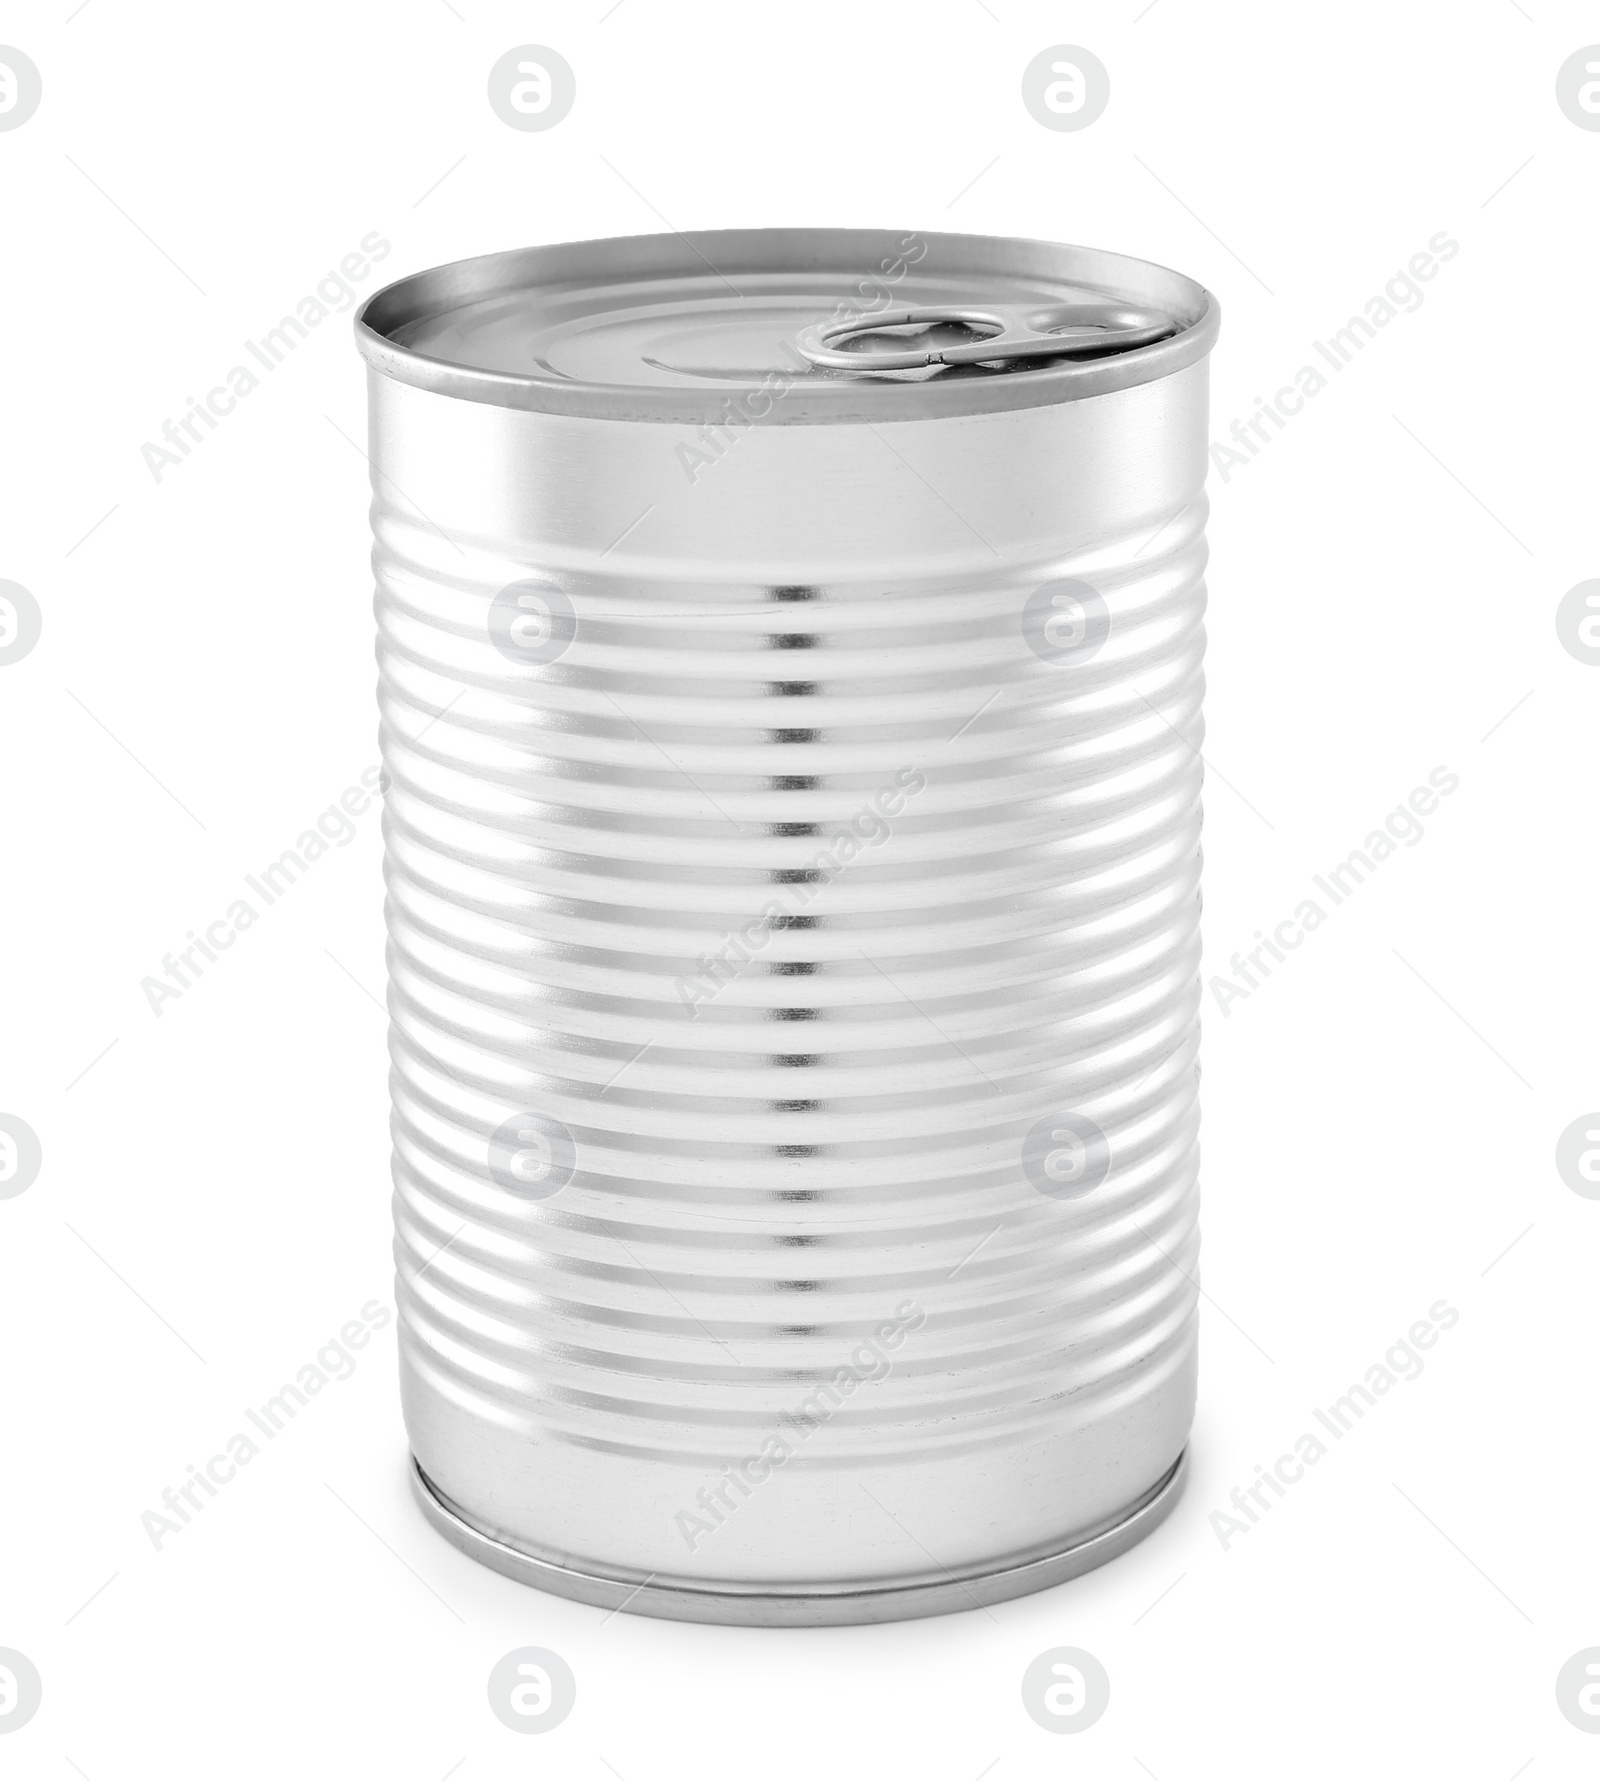 Photo of Closed metal tin can isolated on white